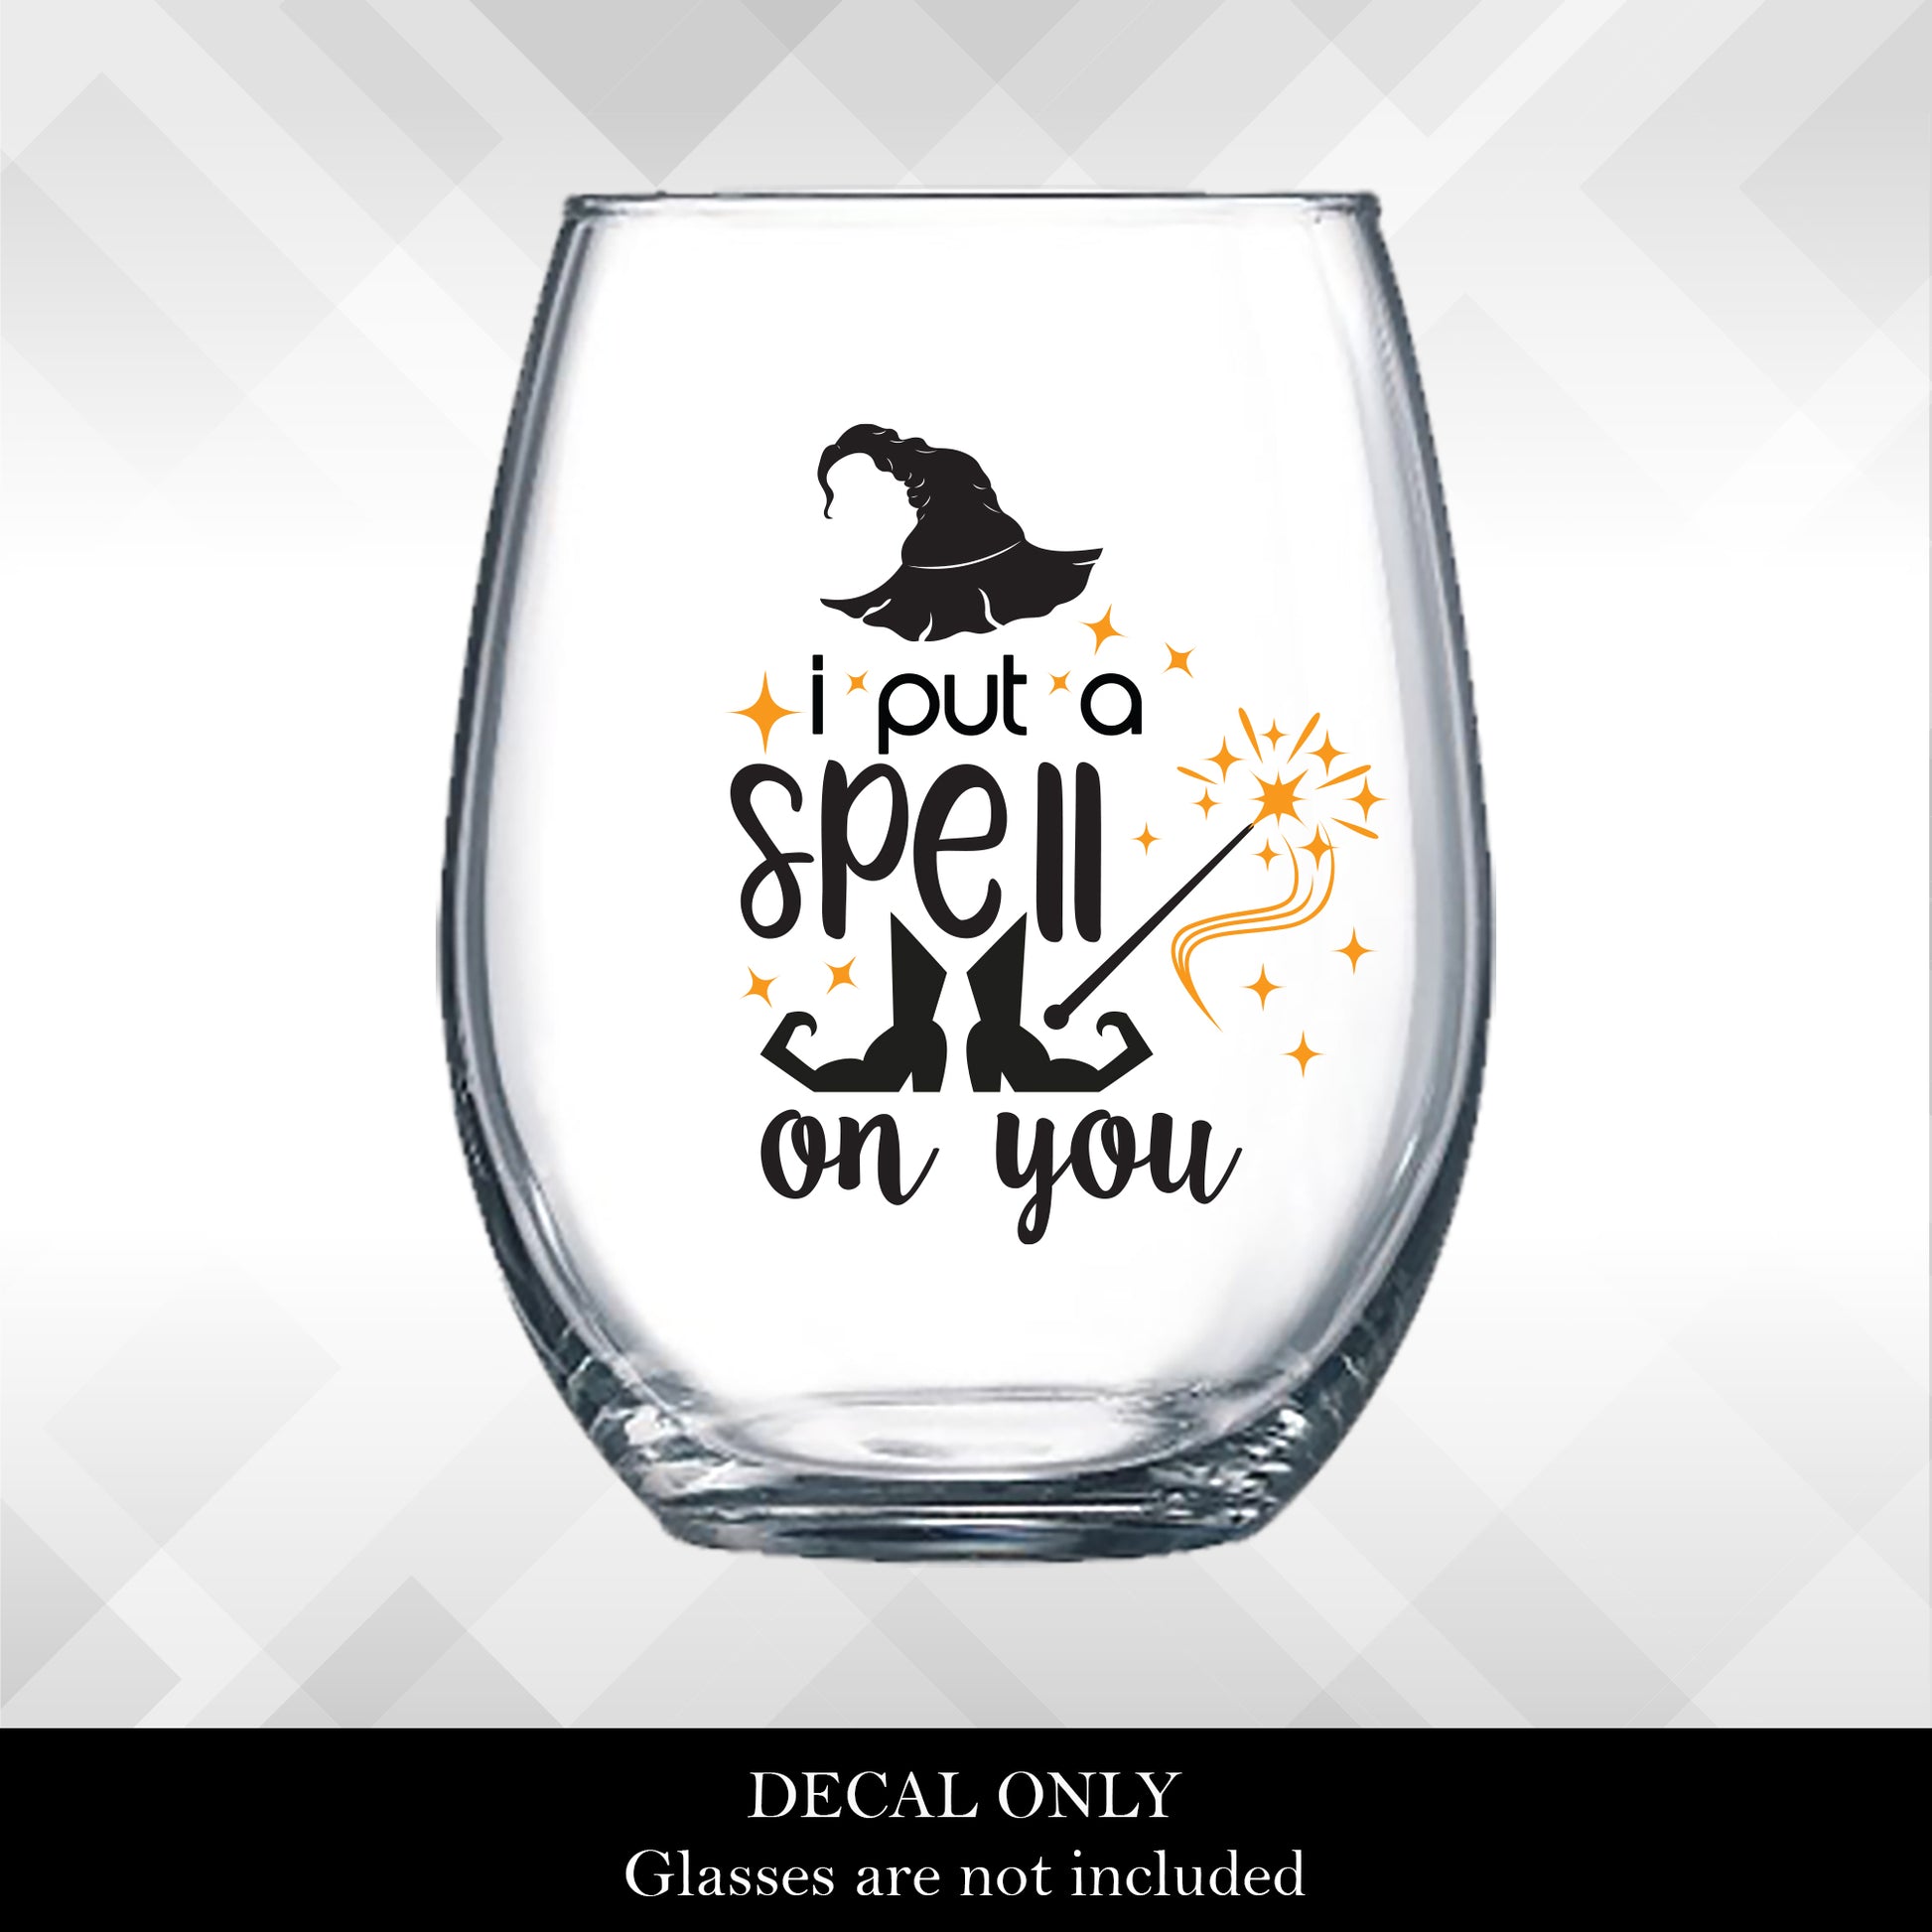 Decal I Put a Spell on You for Halloween Wine Glasses